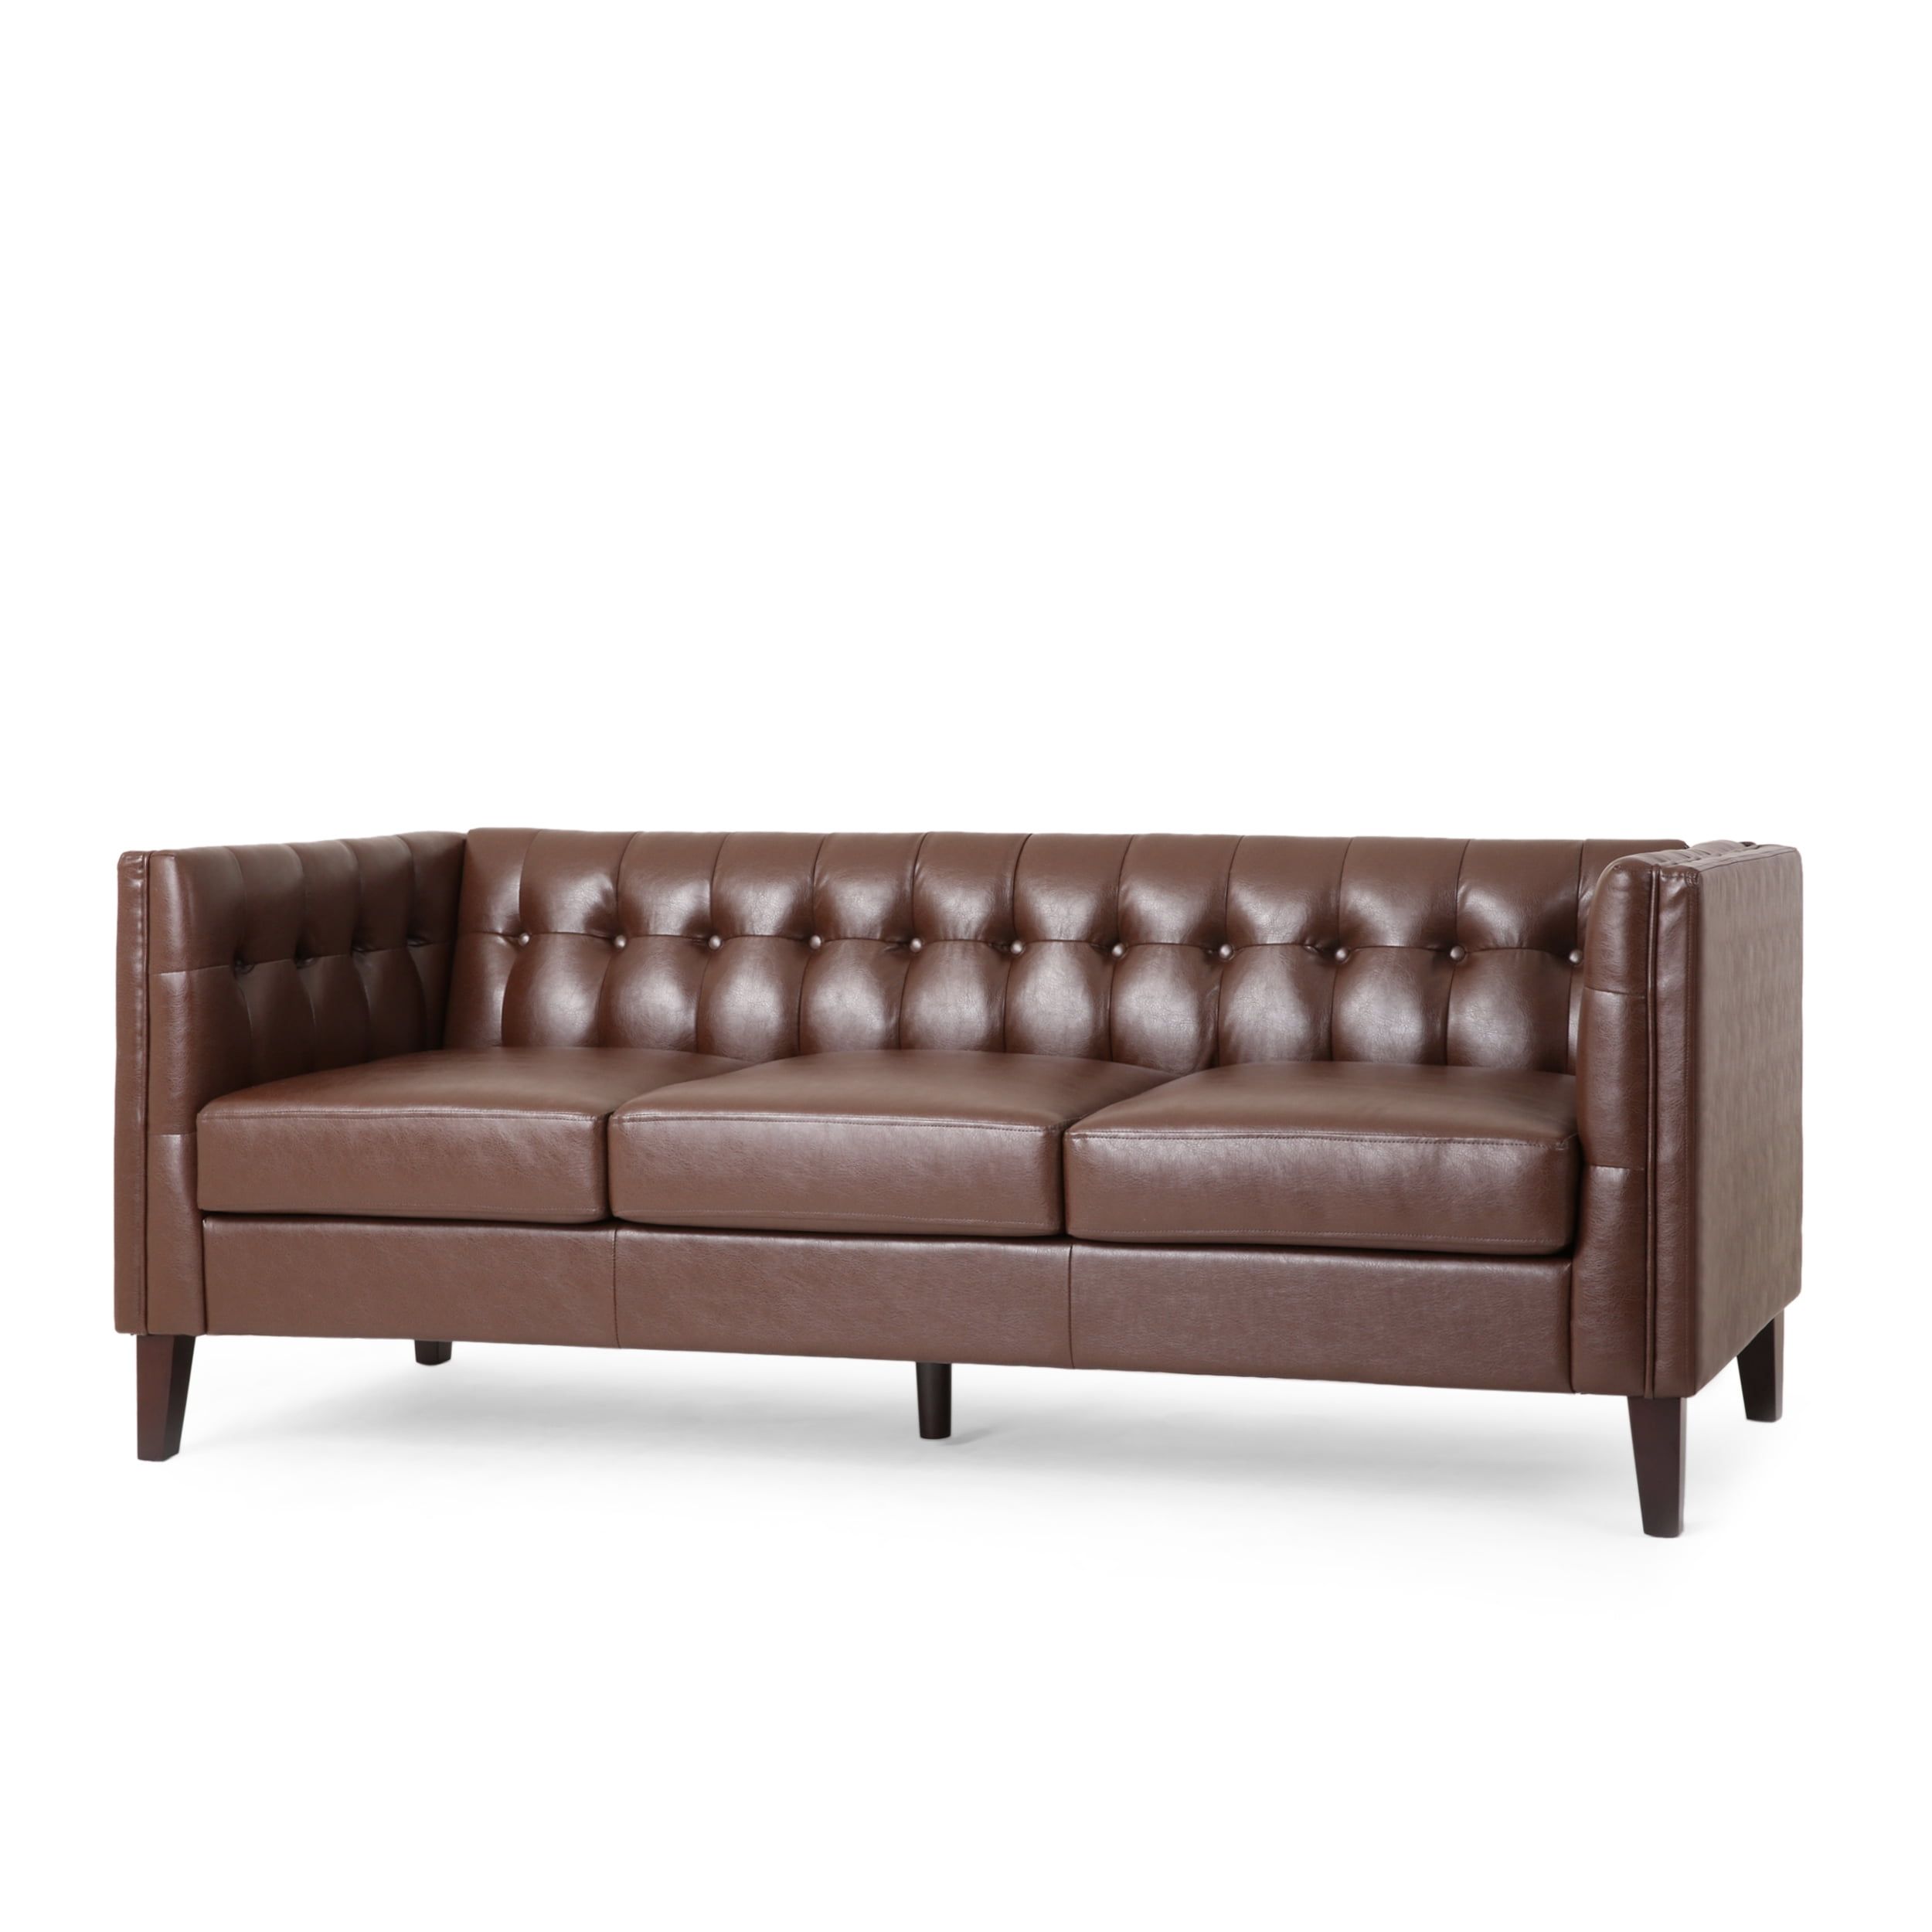 Noble House Sadlier Faux Leather Tufted 3 Seater Sofa, Dark Brown –  Walmart For Faux Leather Sofas In Dark Brown (View 8 of 15)